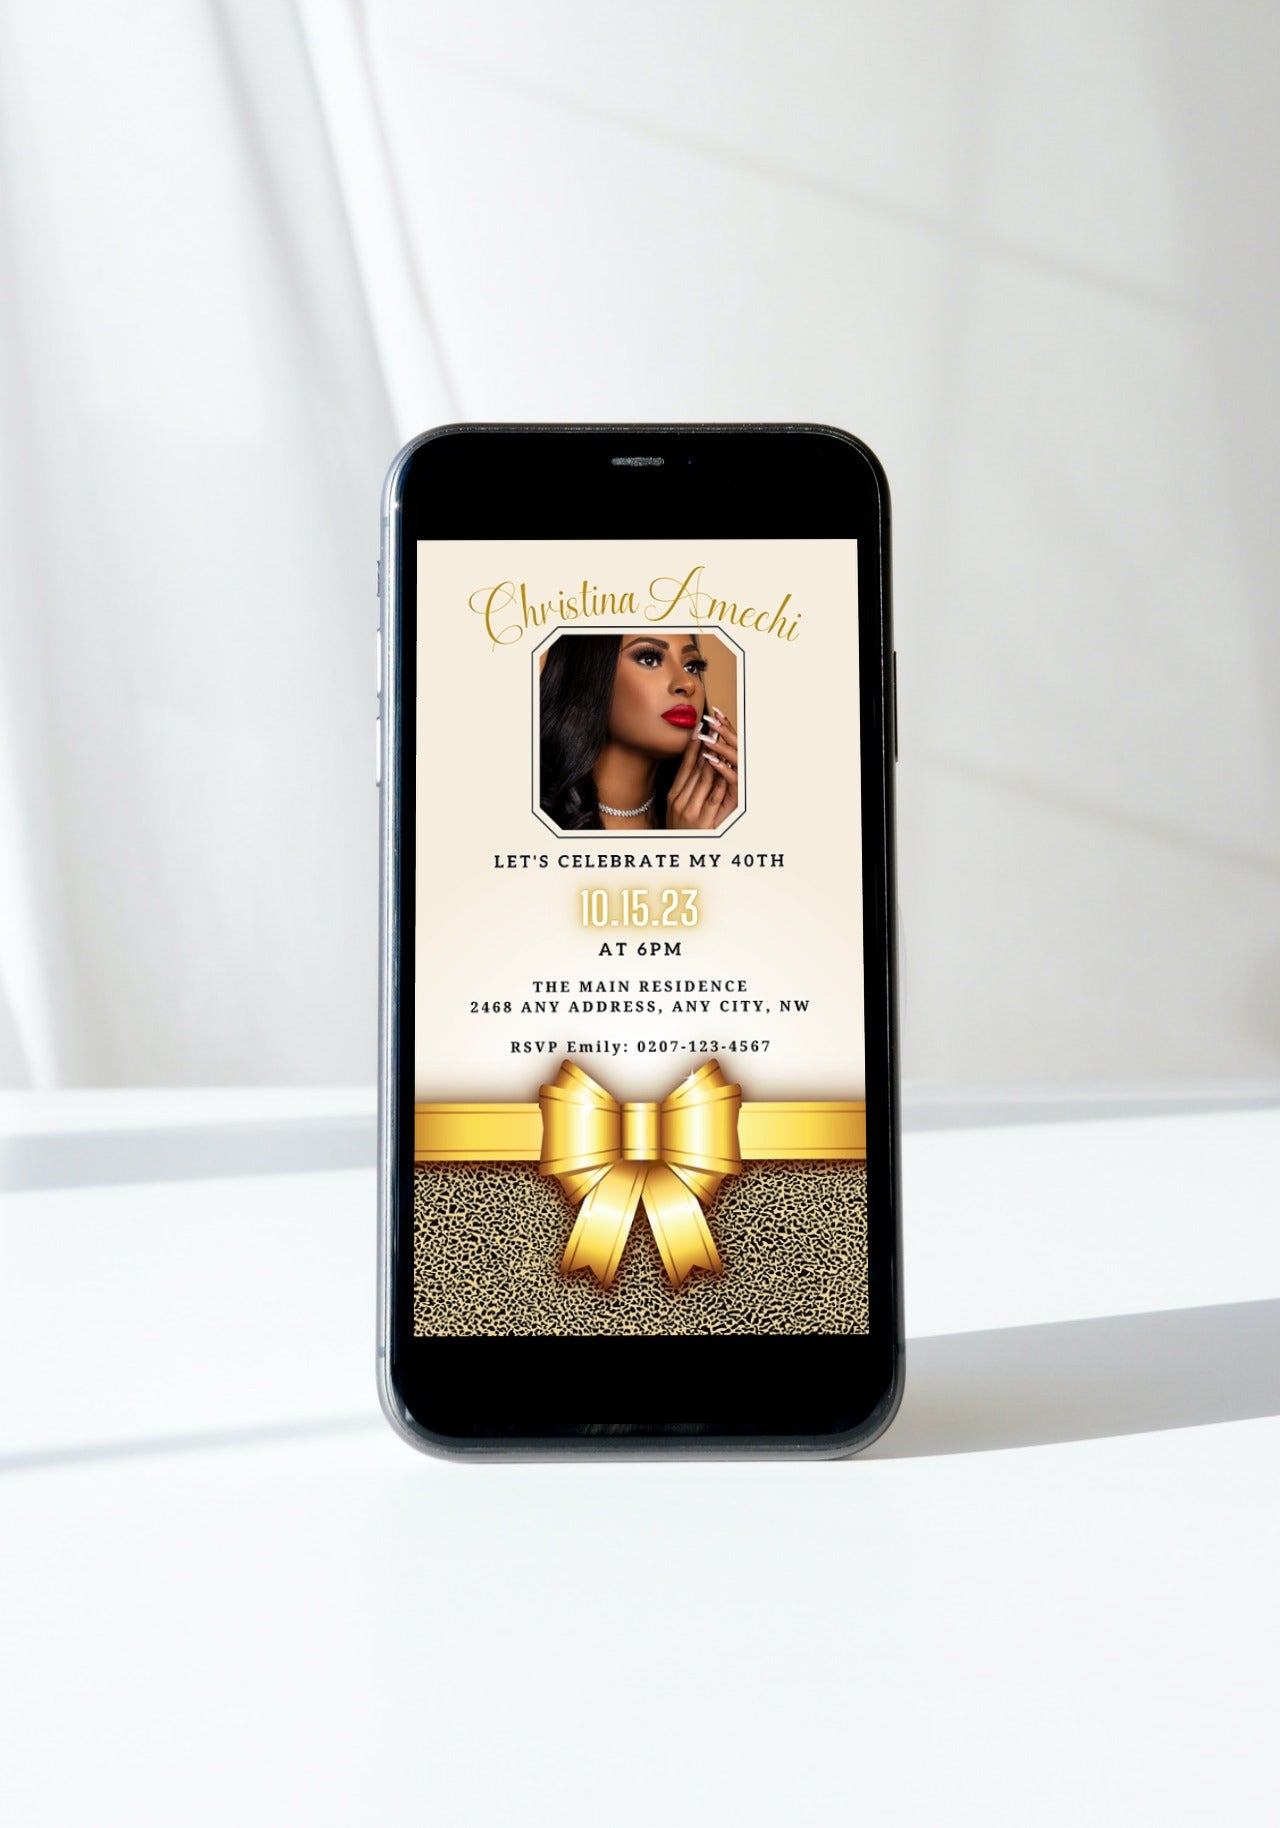 Cell phone with a customizable digital invitation displaying a woman's face and a gold bow, ideal for a 40th birthday.